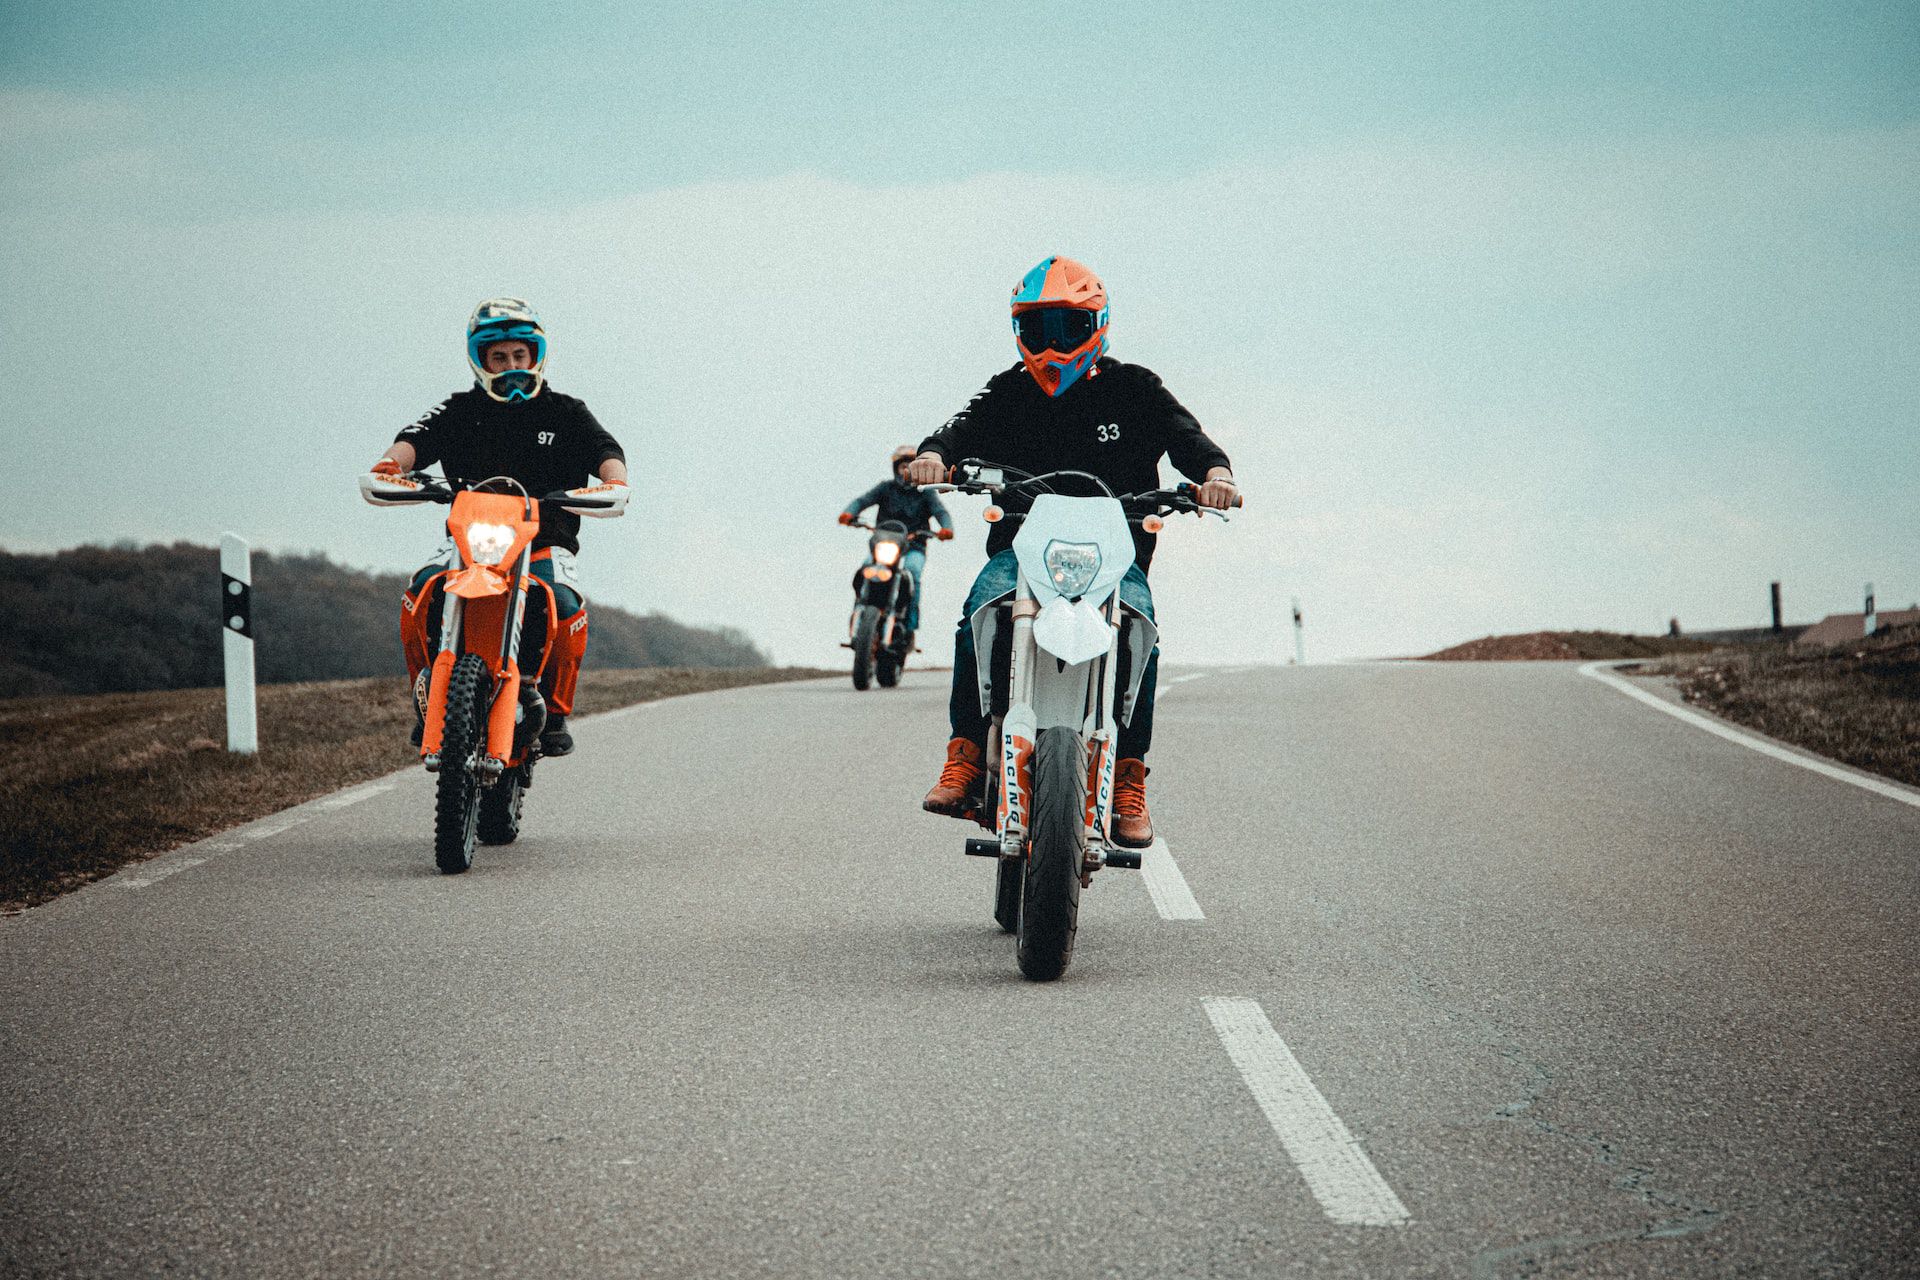 The road to the future features motorcycles. Photo by Marcel Strauß on Unsplash